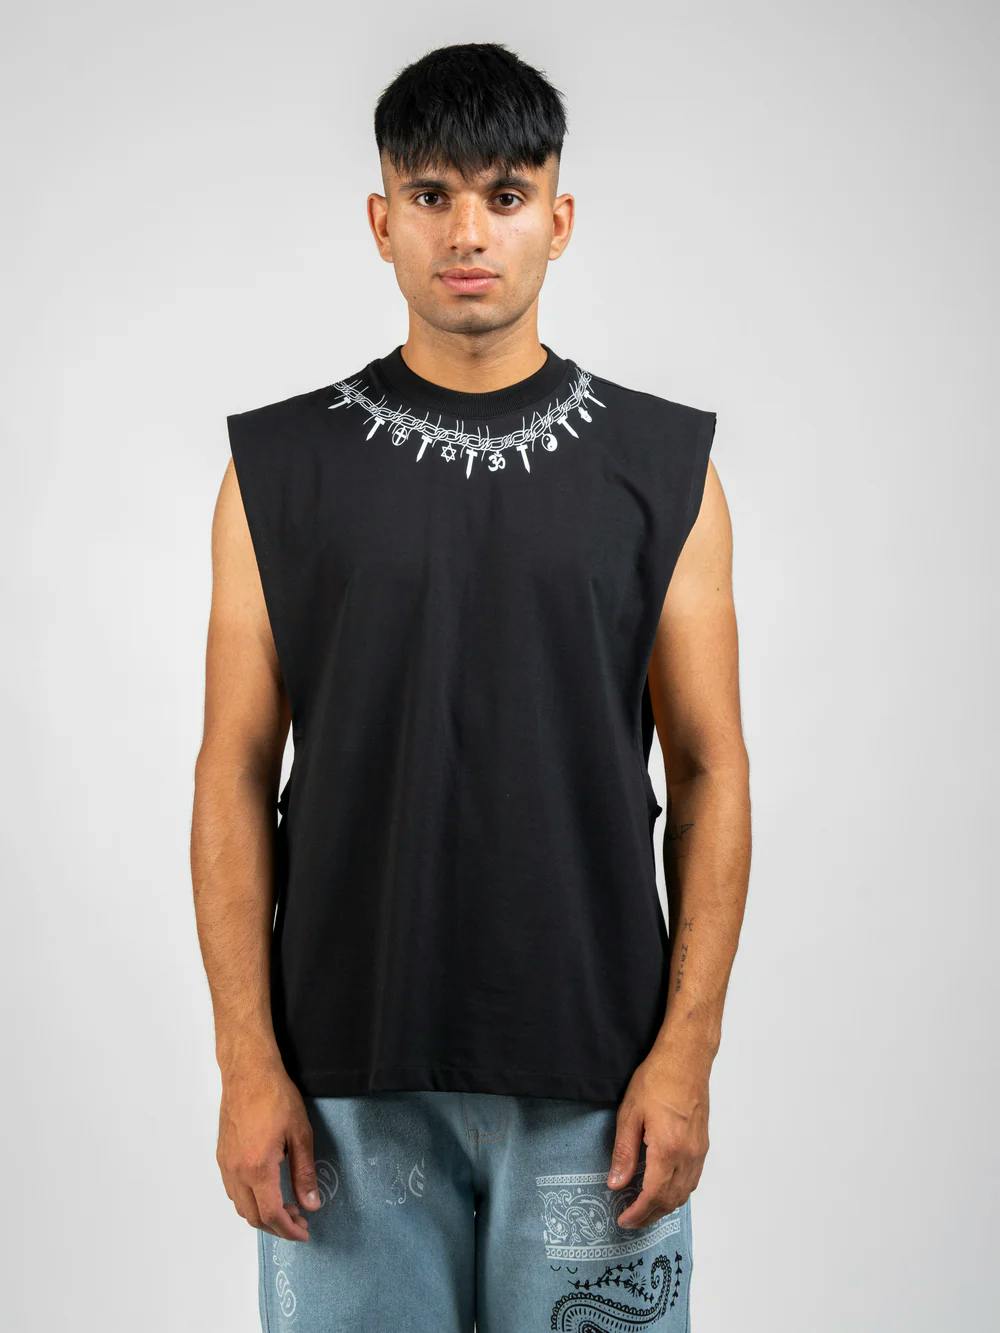 Black Religious Necklace Vest, a product by TOFFLE